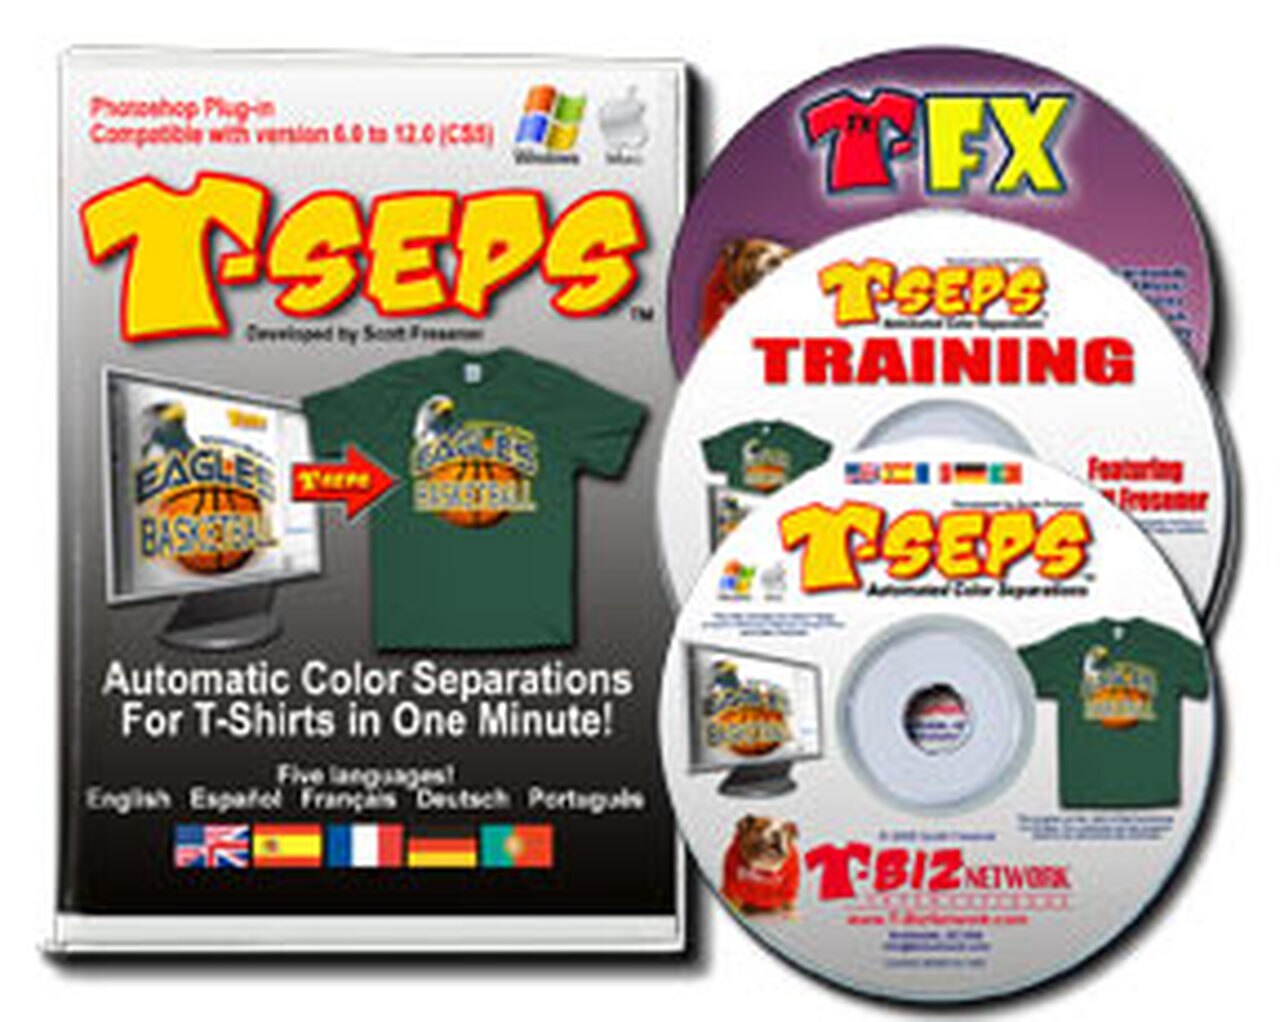 fastfilms color separation software for screen